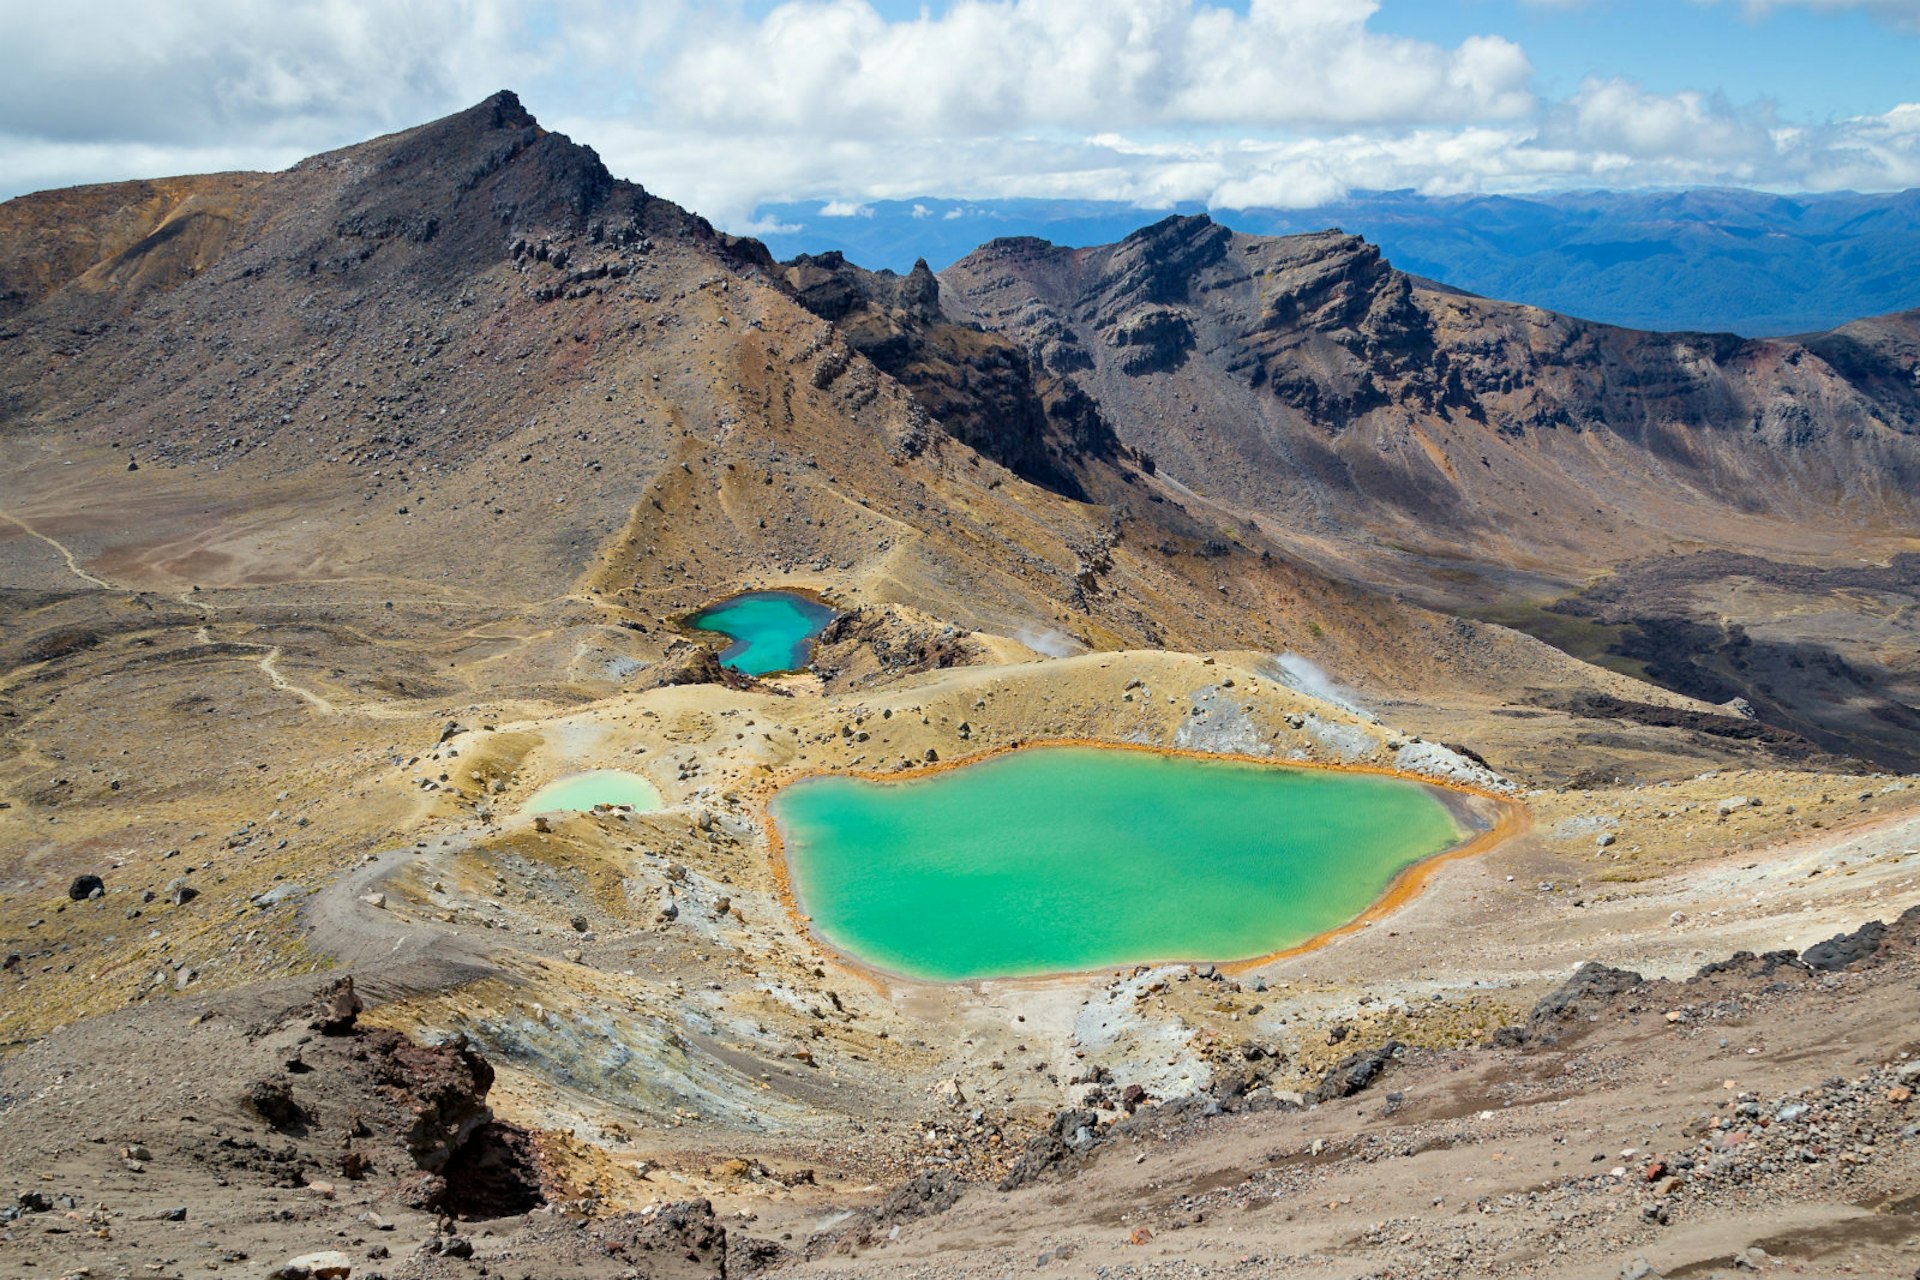 Prepare for priceless views on the Tongariro Alpine Crossing, New Zealand © Jessica Page Photo / Getty Images